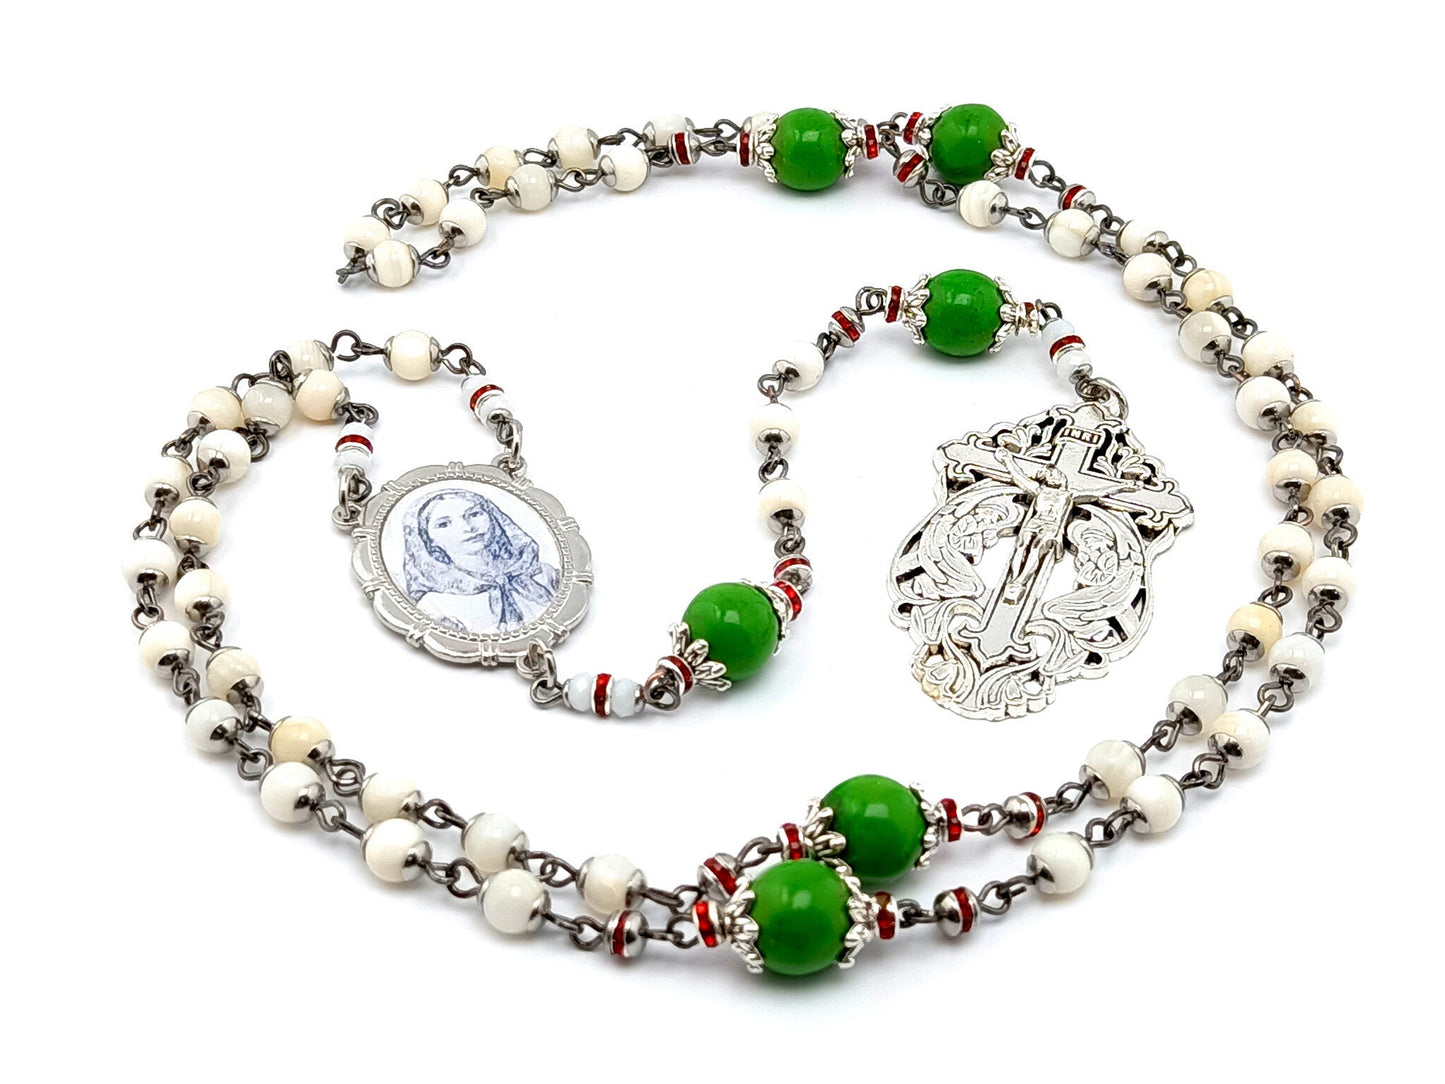 Saint Dymphna unique rosary beads mother of pearl and howlite gemstone rosary beads with two angels crucifix.